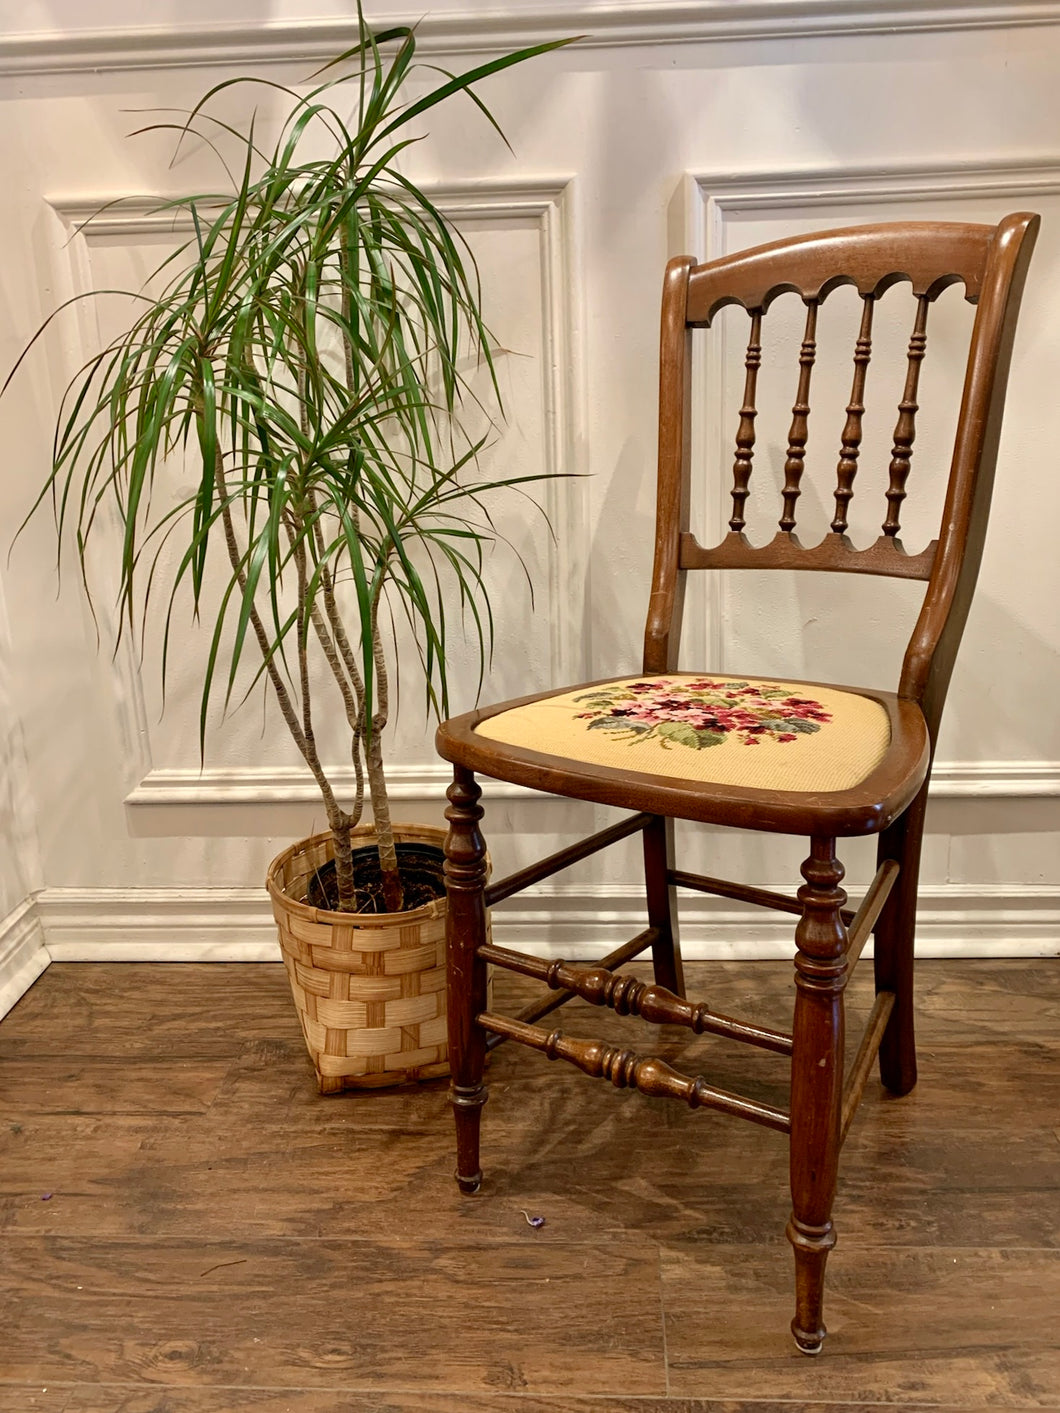 Beautiful Vintage Farmhouse Chair with Needlepoint Seat